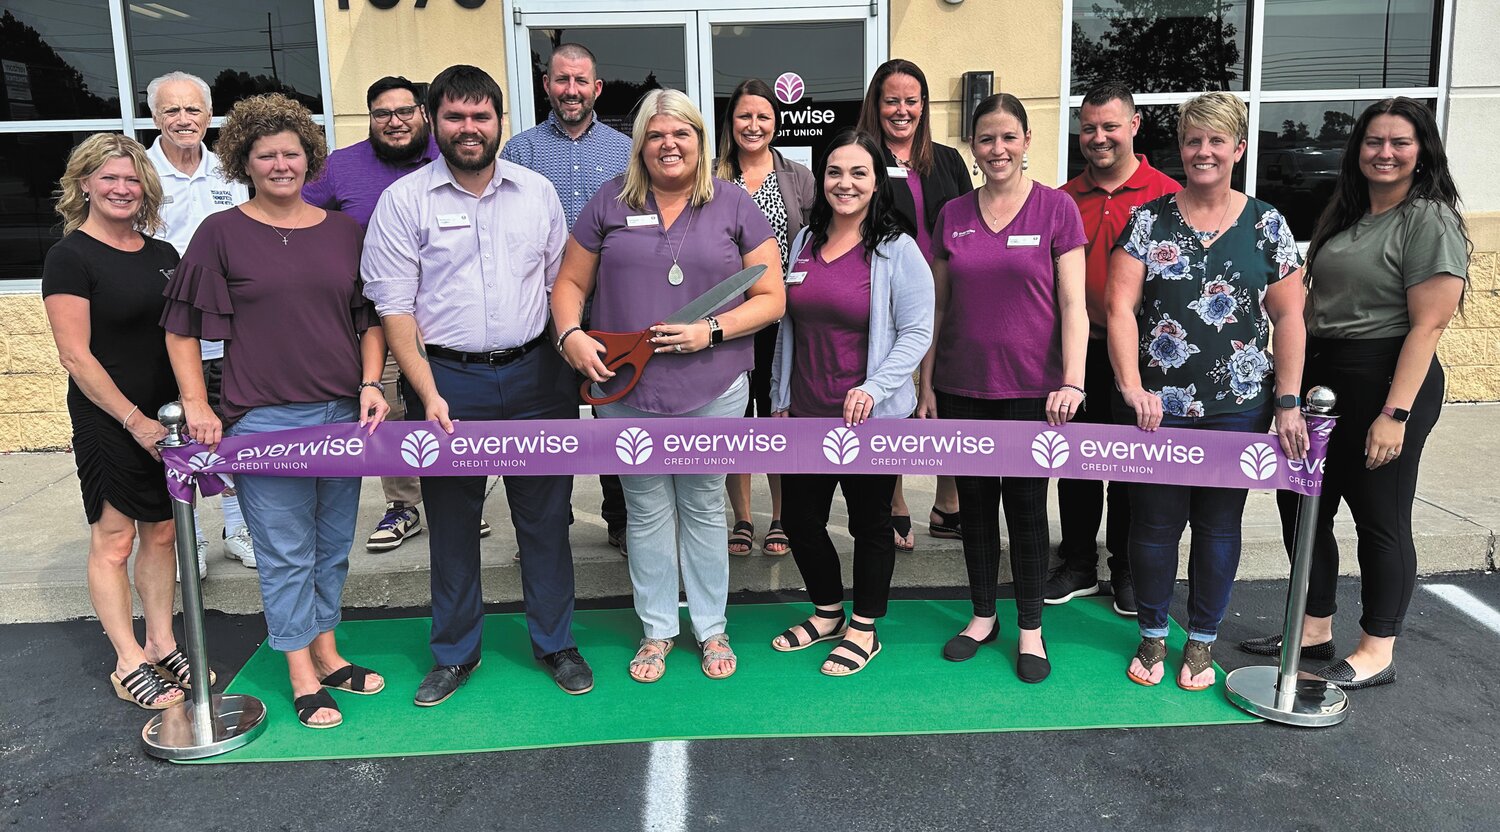 The Crawfordsville/Montgomery County Chamber of Commerce celebrated Everwise Credit Union’s rebranding and new name from Teacher Credit Union.